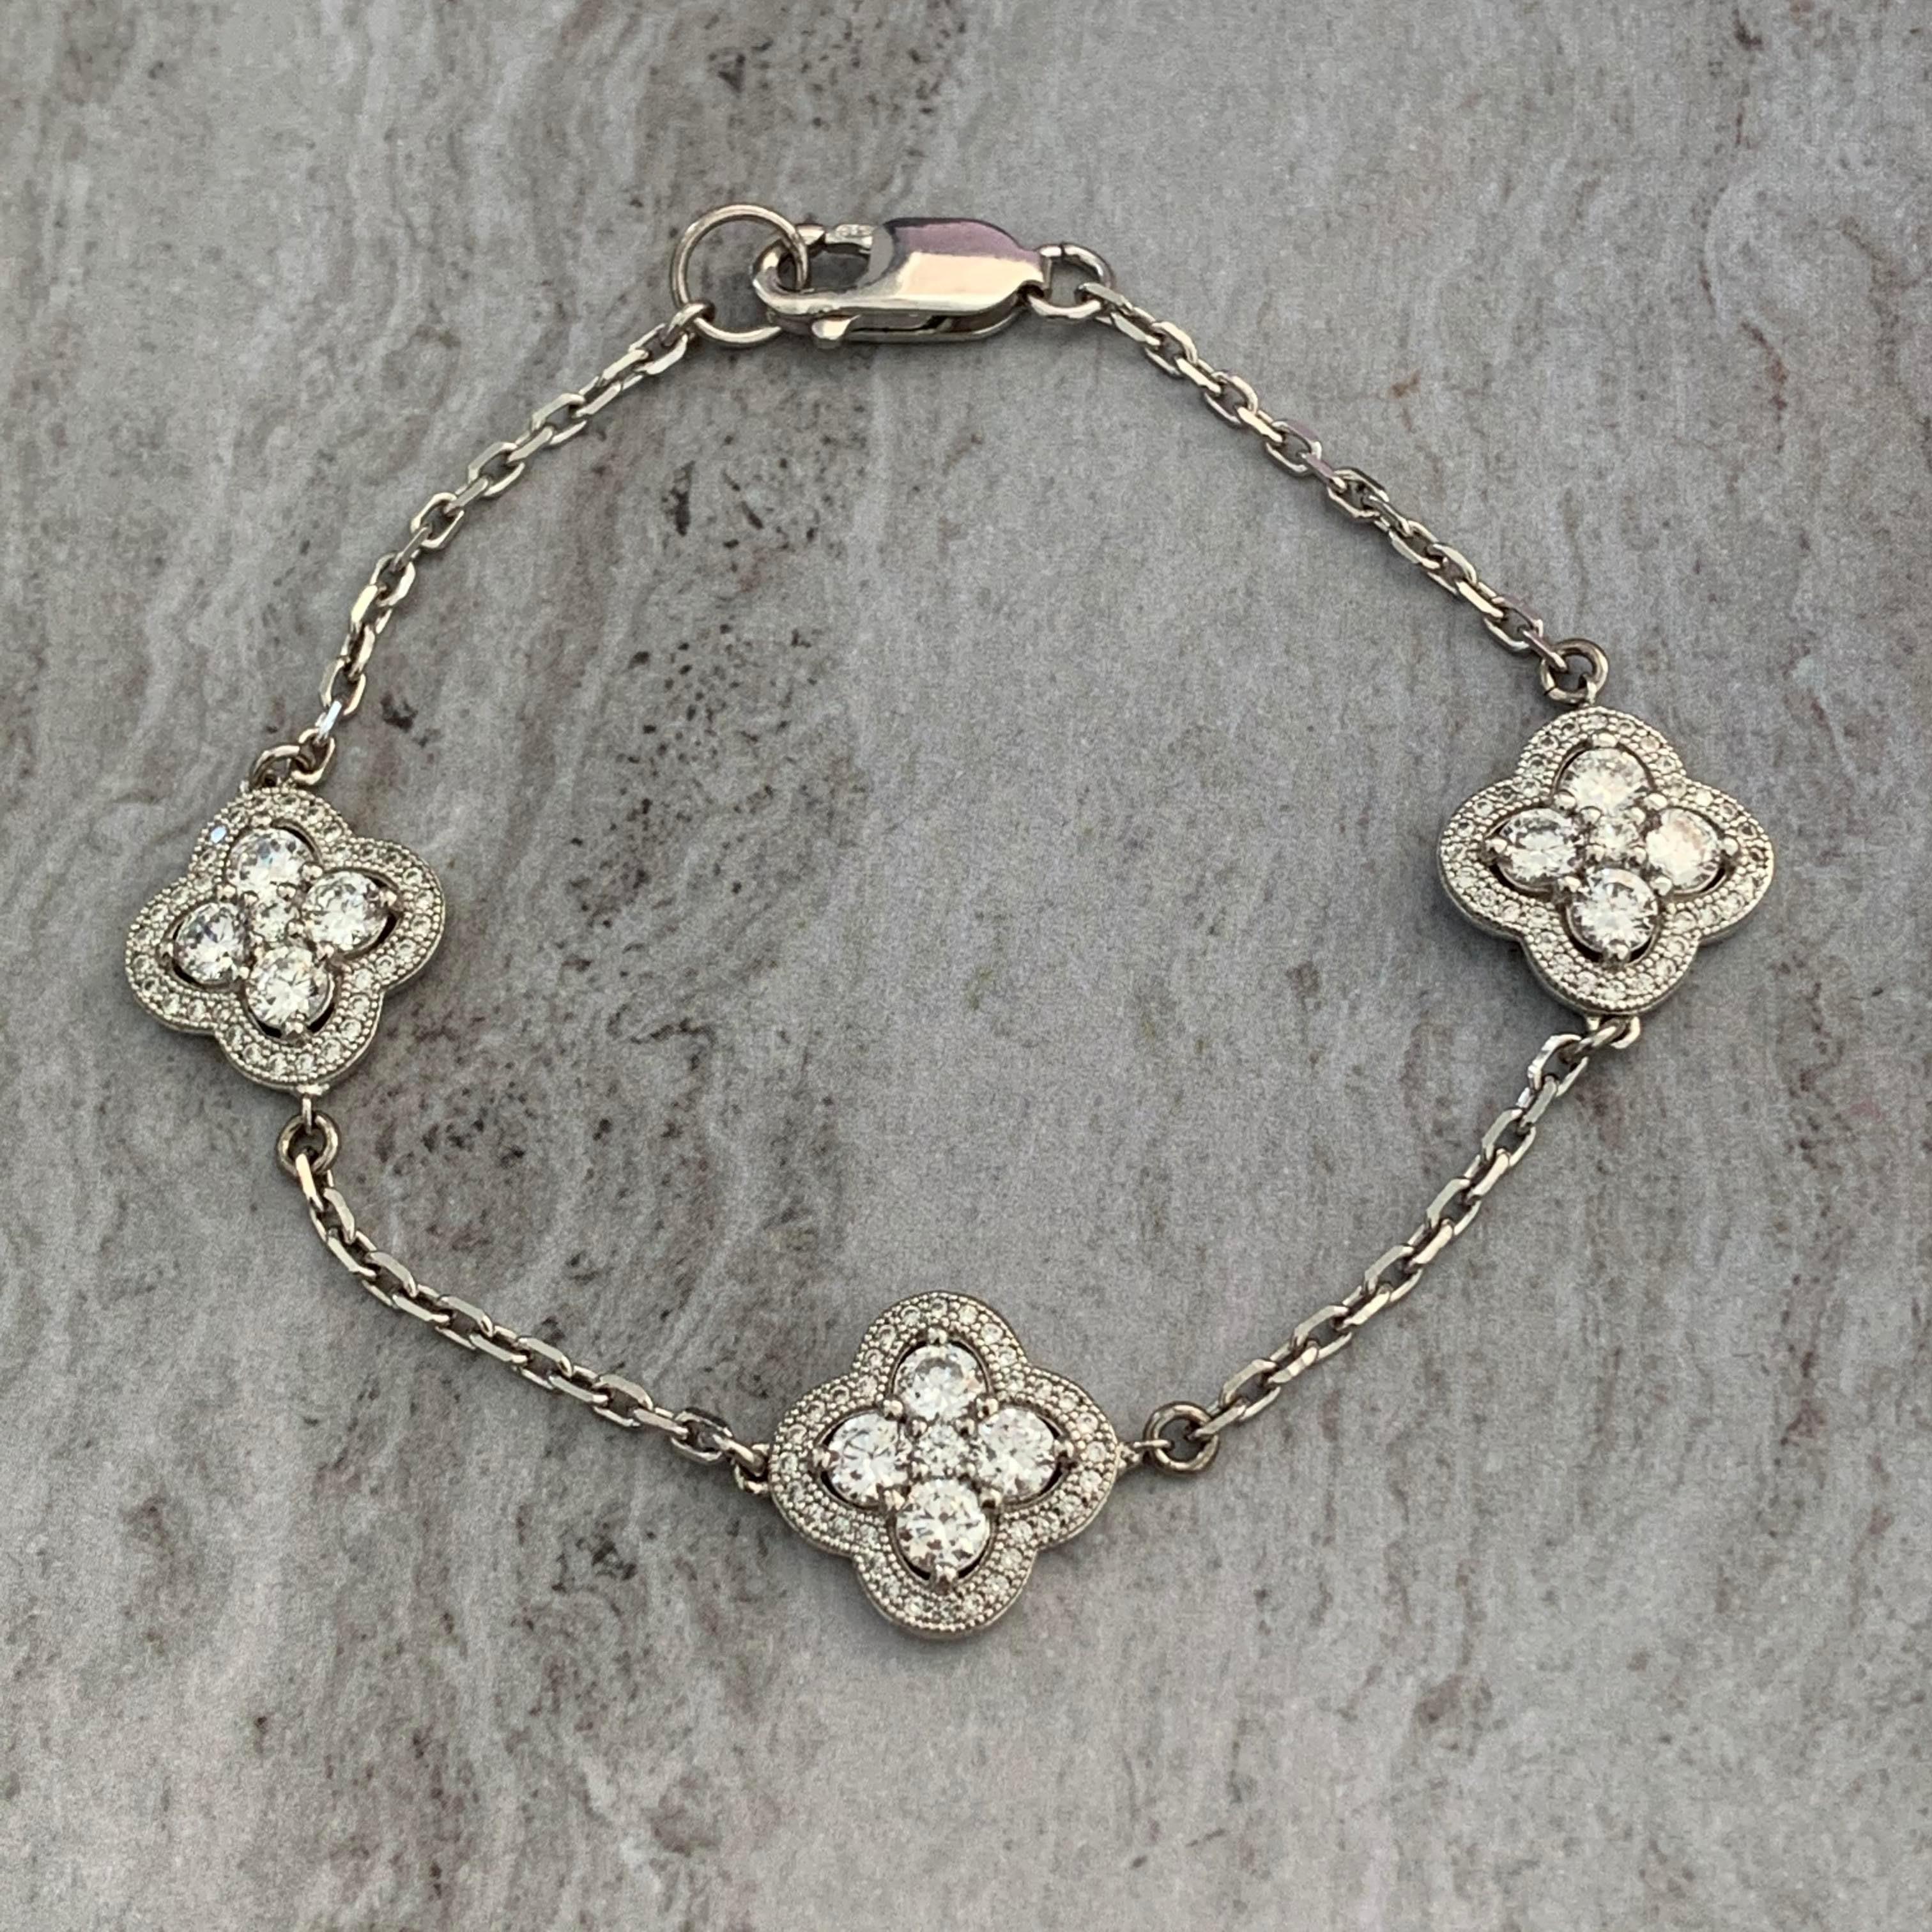 Bijoux Num Micropave Faux Diamond Clover Sterling Silver Station Bracelet

This beautiful bracelet features 3 pieces of micropave-set faux diamond cubic zirconia clover, interconnect with faceted chain, and lobster claw closure. The metal is